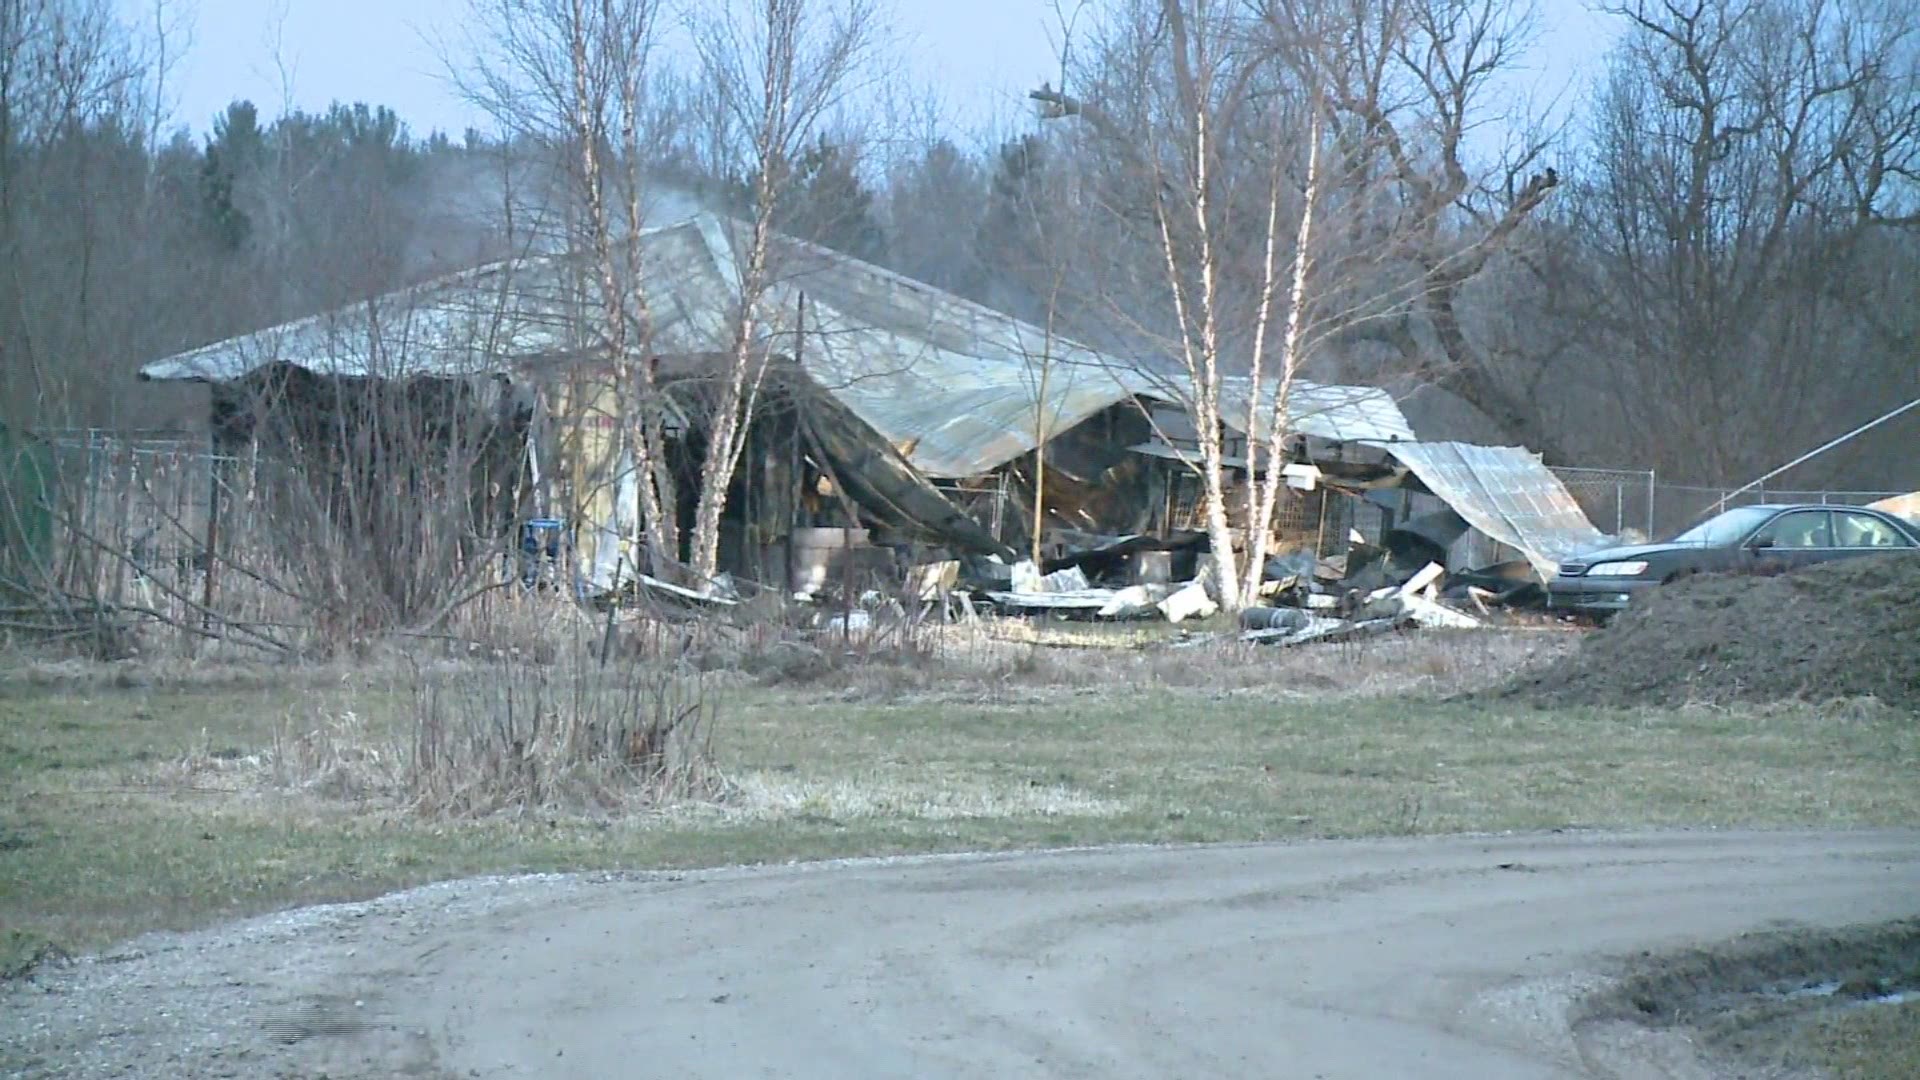 As many as 30 dogs feared dead in Muskegon County kennel fire - raw footage of damage.